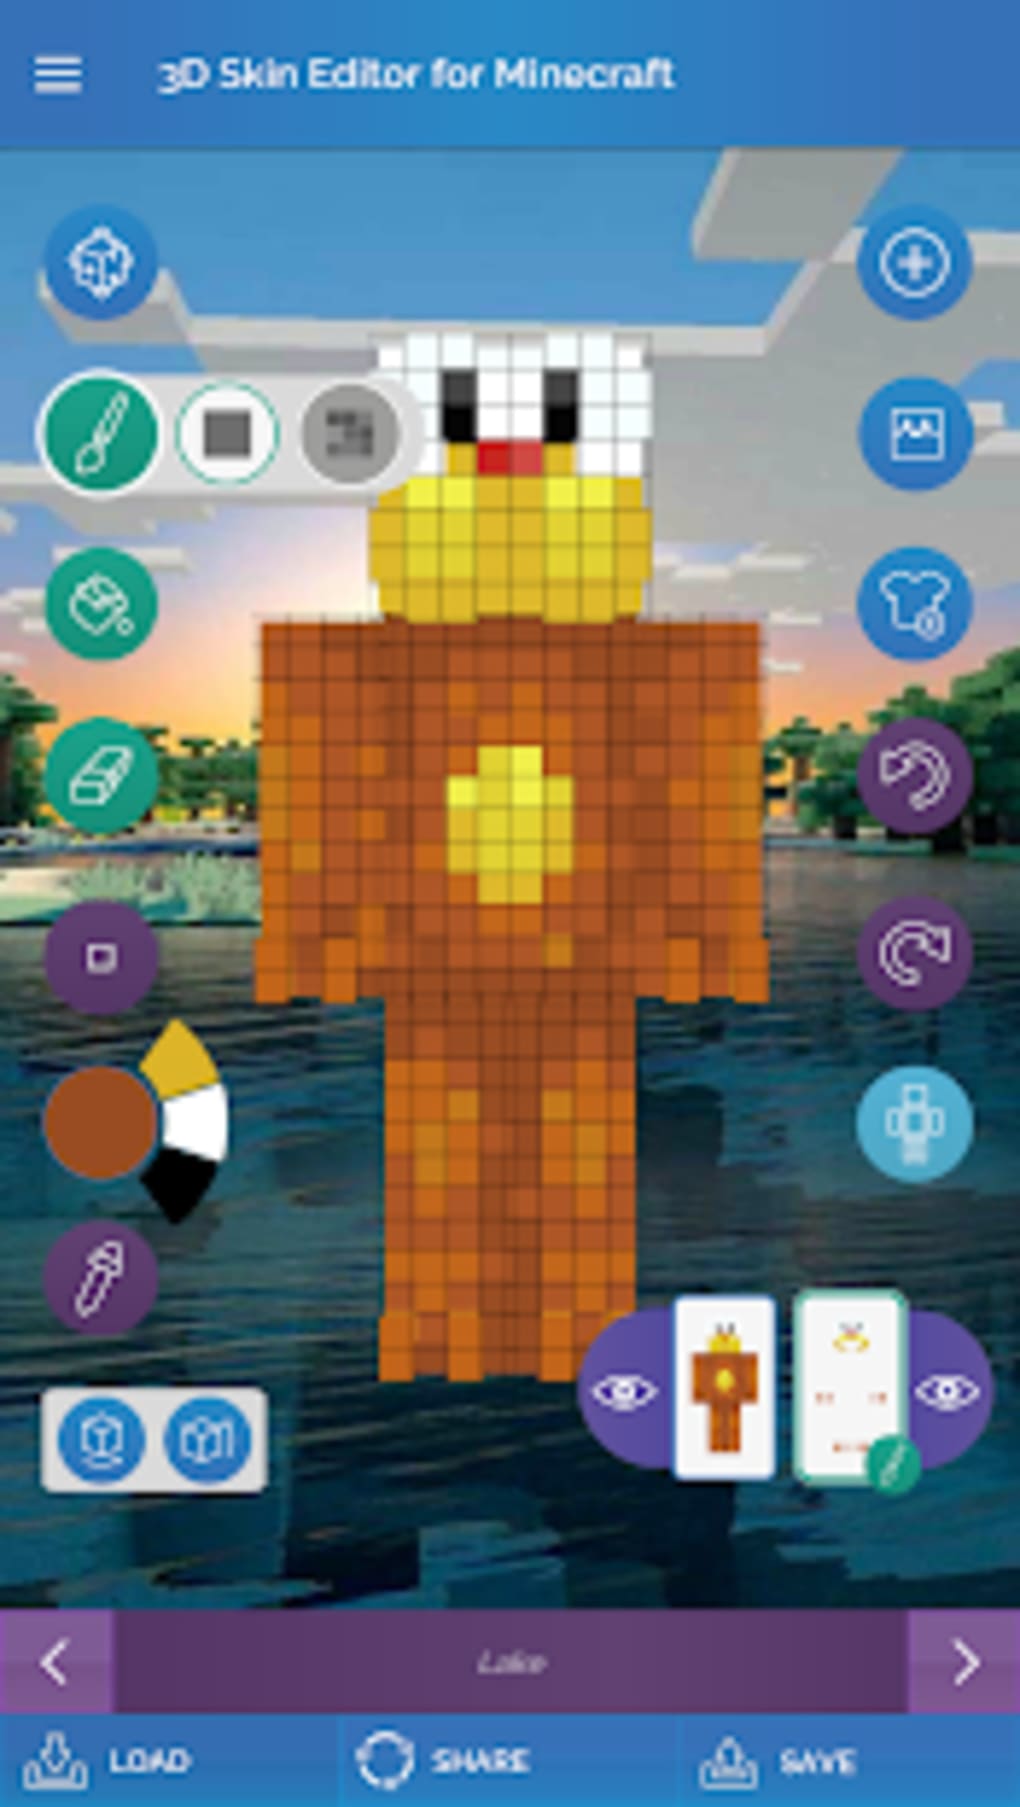 Skin Creator 3D for Minecraft by Eighth Day Software, L.L.C.